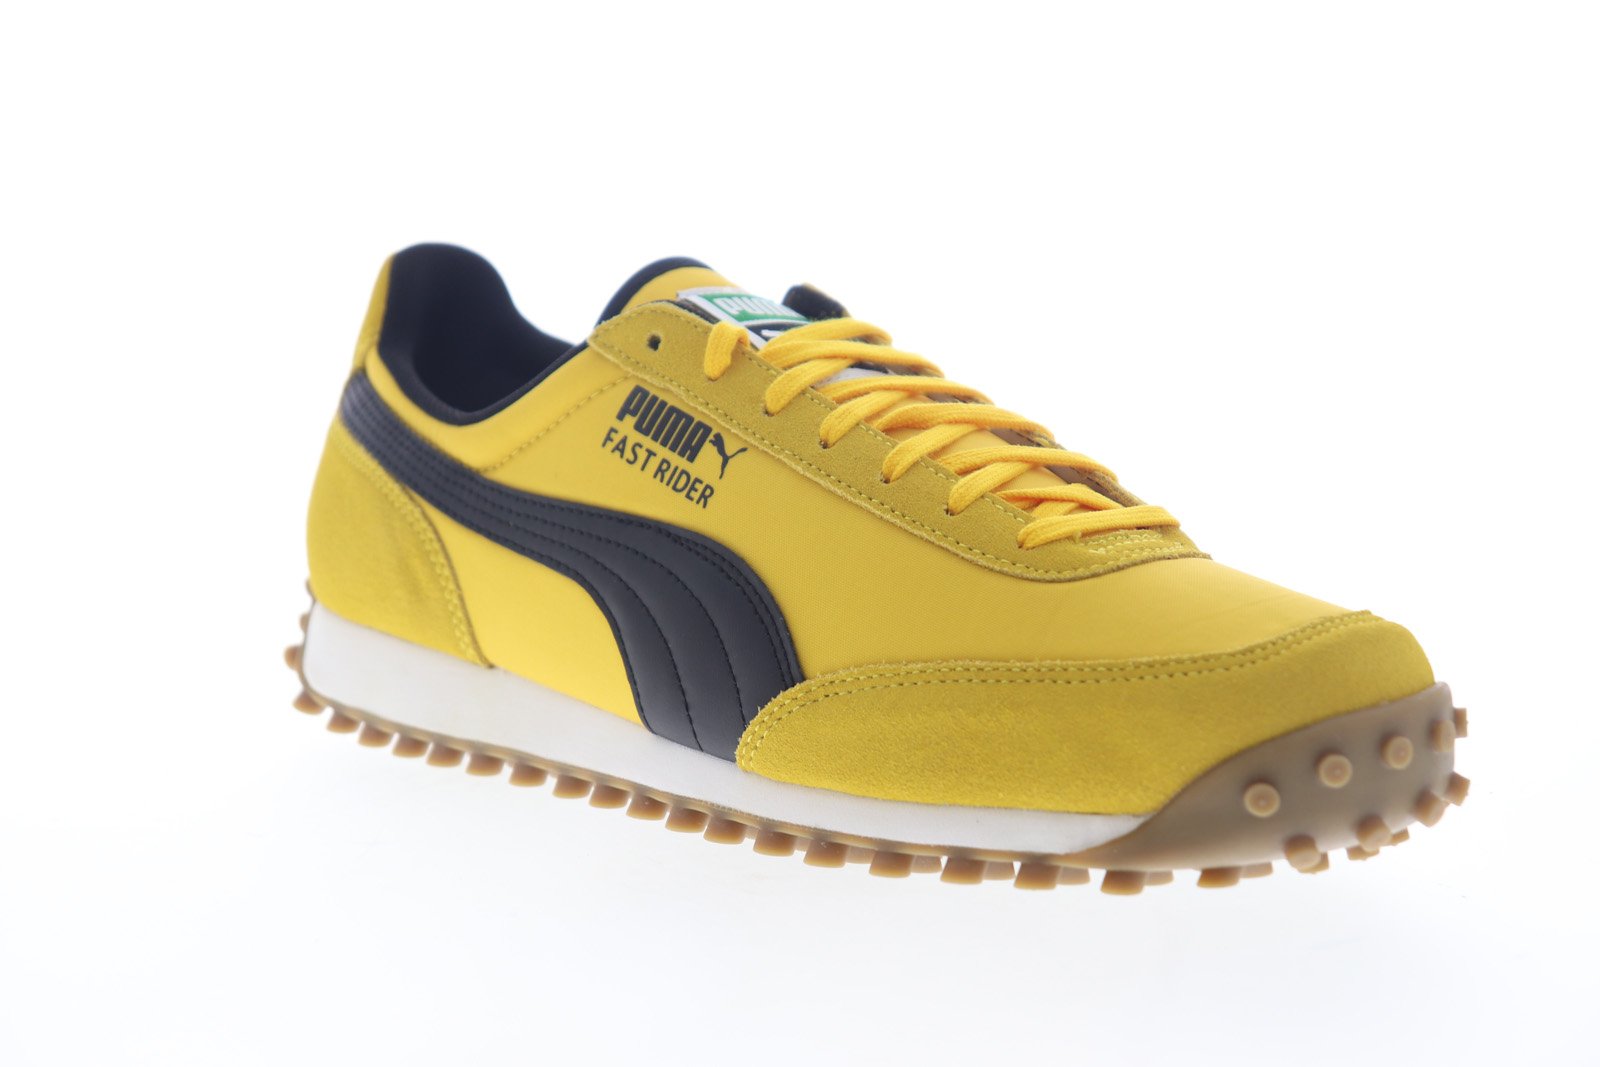 Likeur Te voet Ithaca Puma Fast Rider Source 37160104 Mens Yellow Low Top Lifestyle Sneakers -  Ruze Shoes